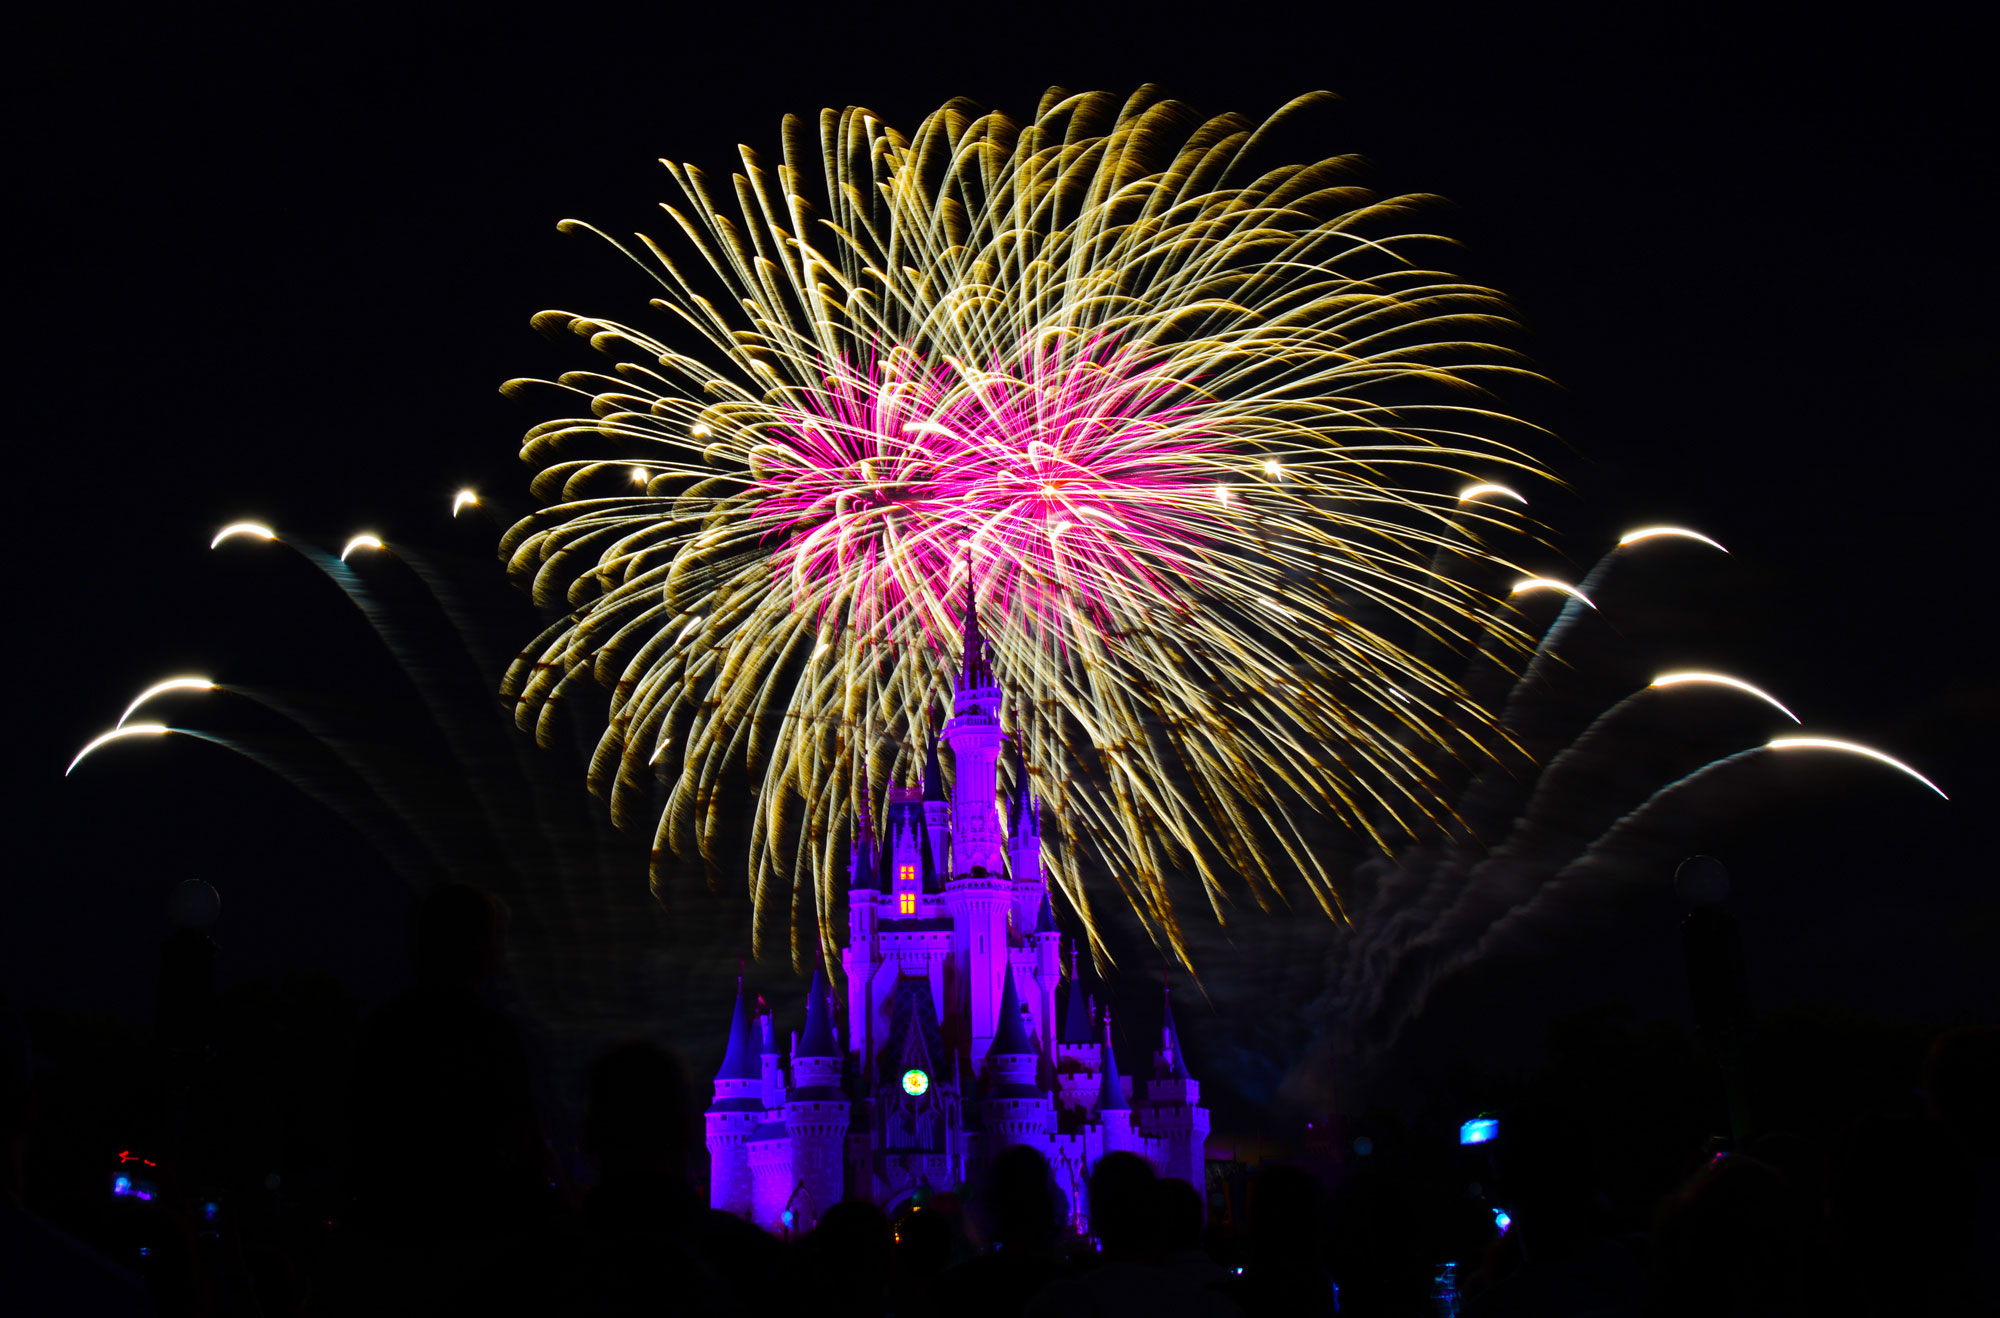 Wishes Fireworks at the Magic Kingdom in Disney World August 2014